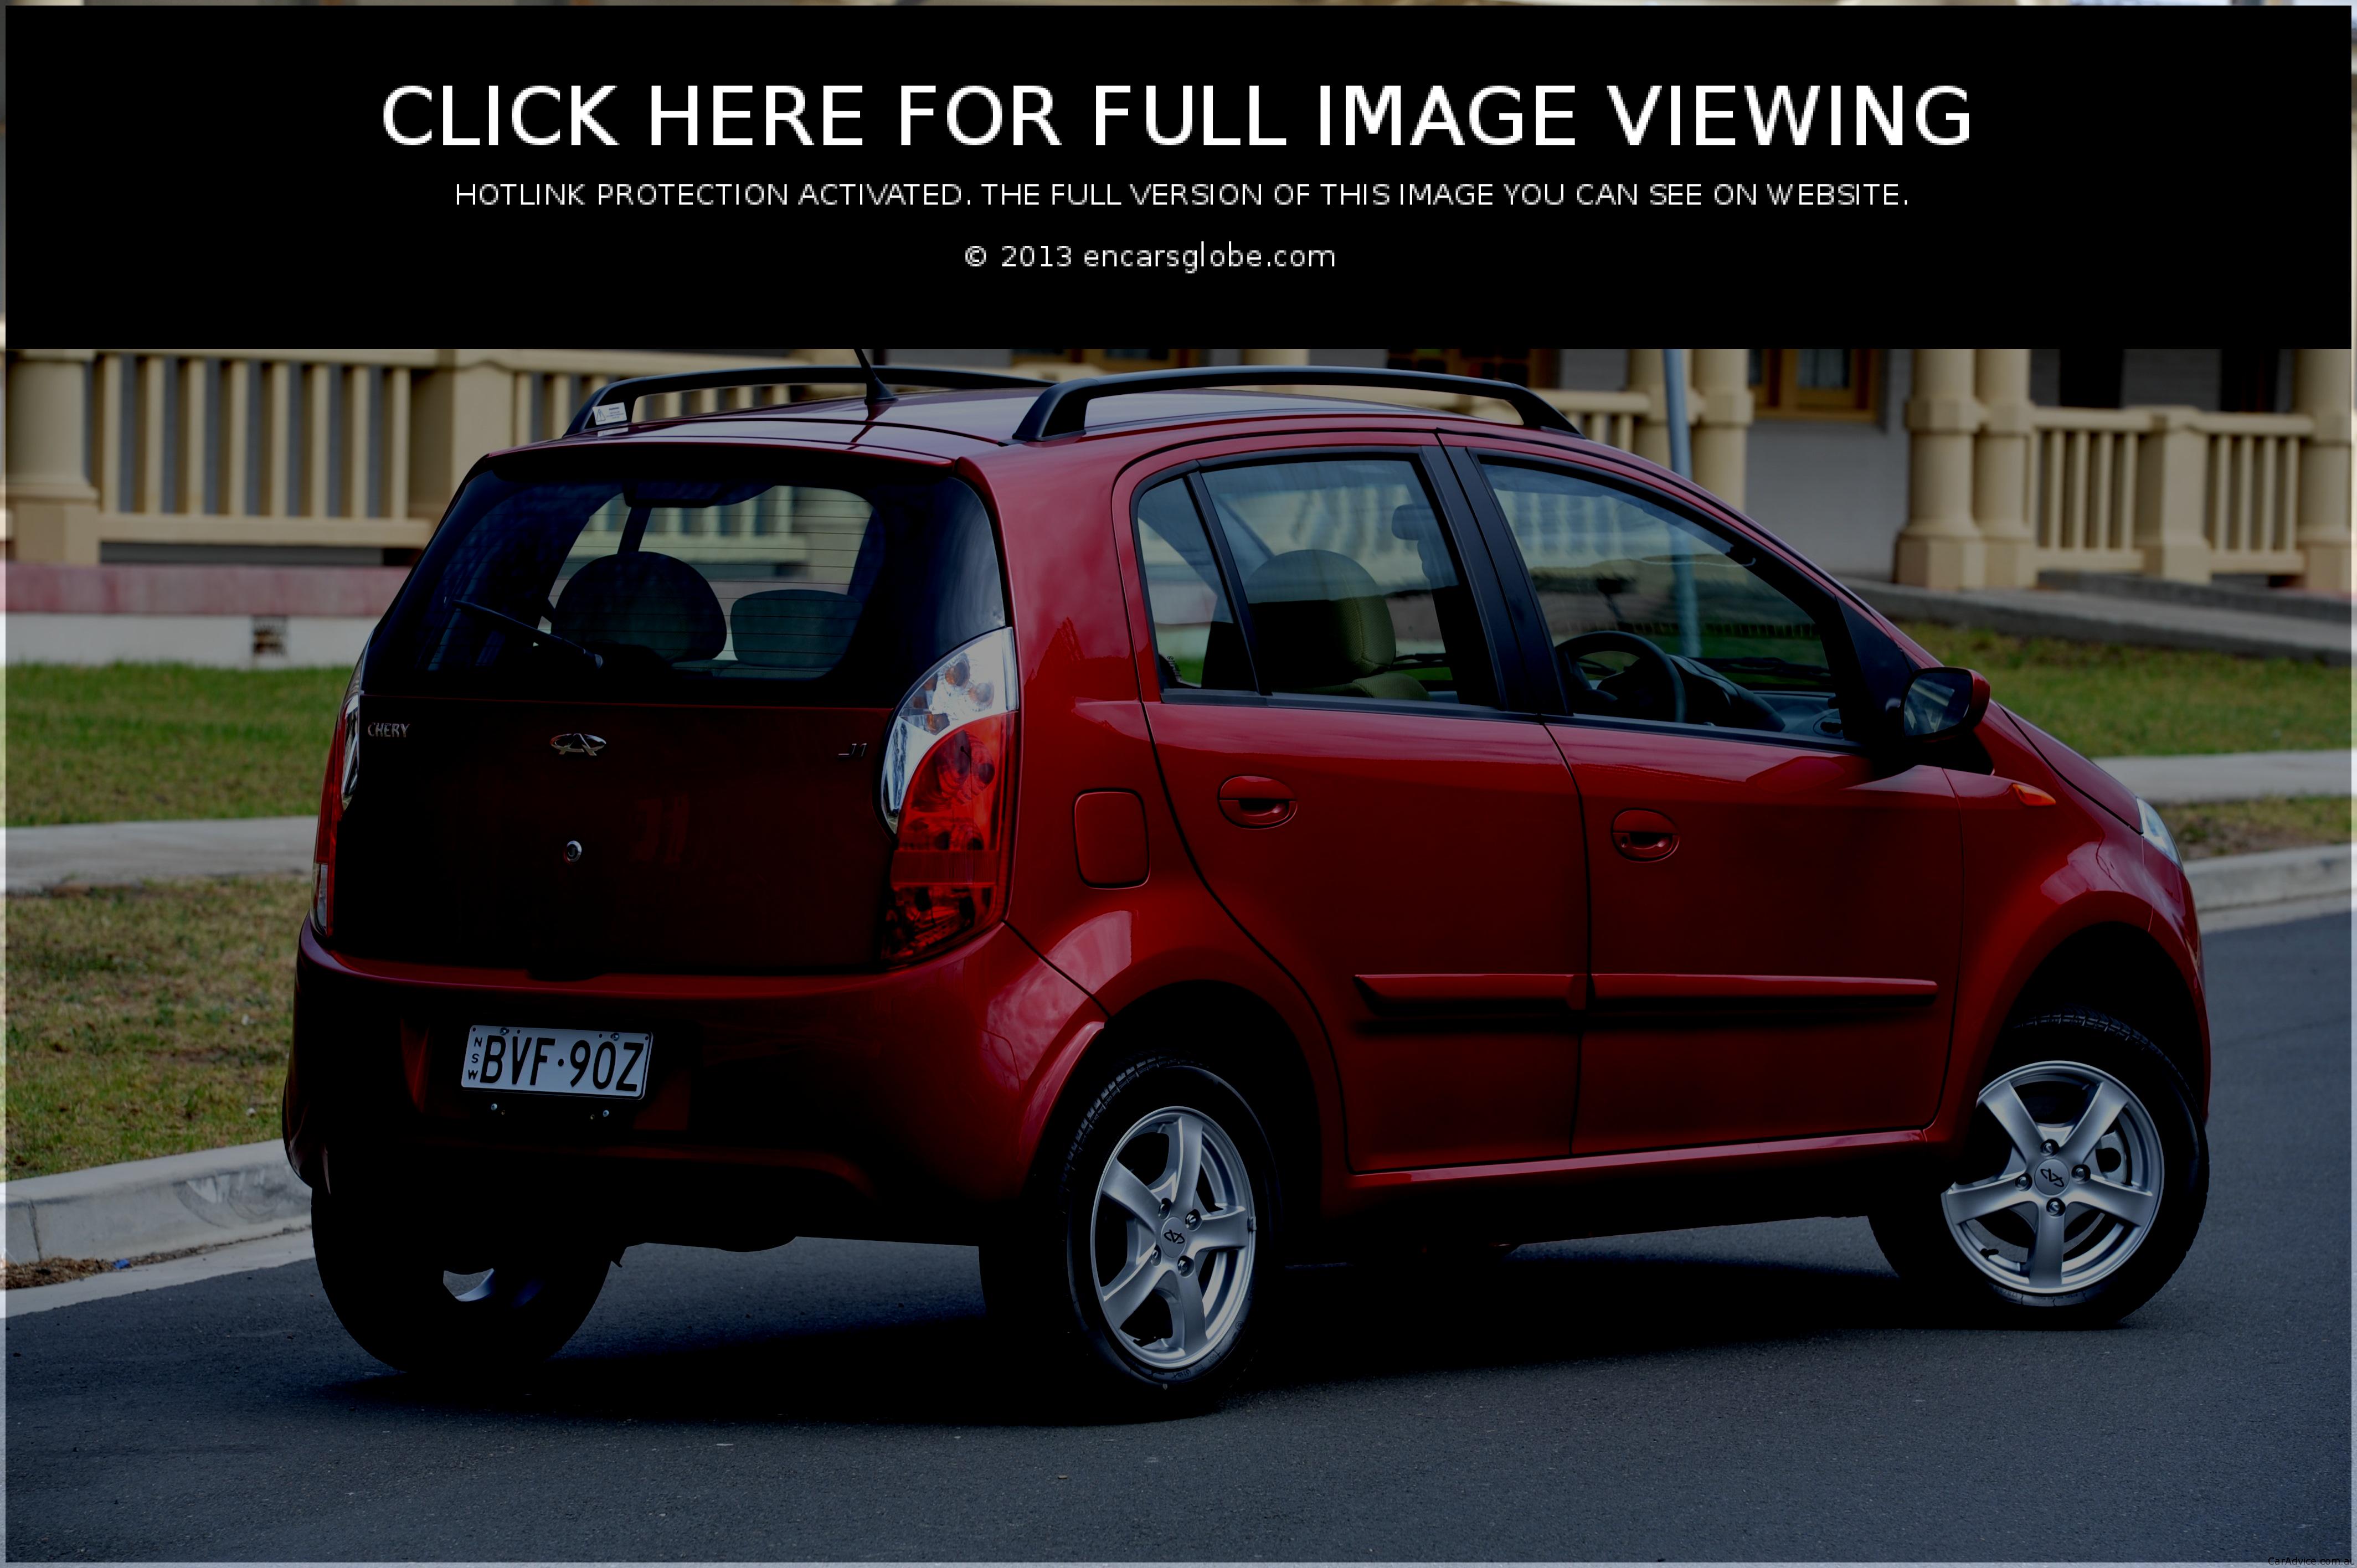 Chery J1 Photo Gallery: Photo #01 out of 9, Image Size - 600 x 400 px